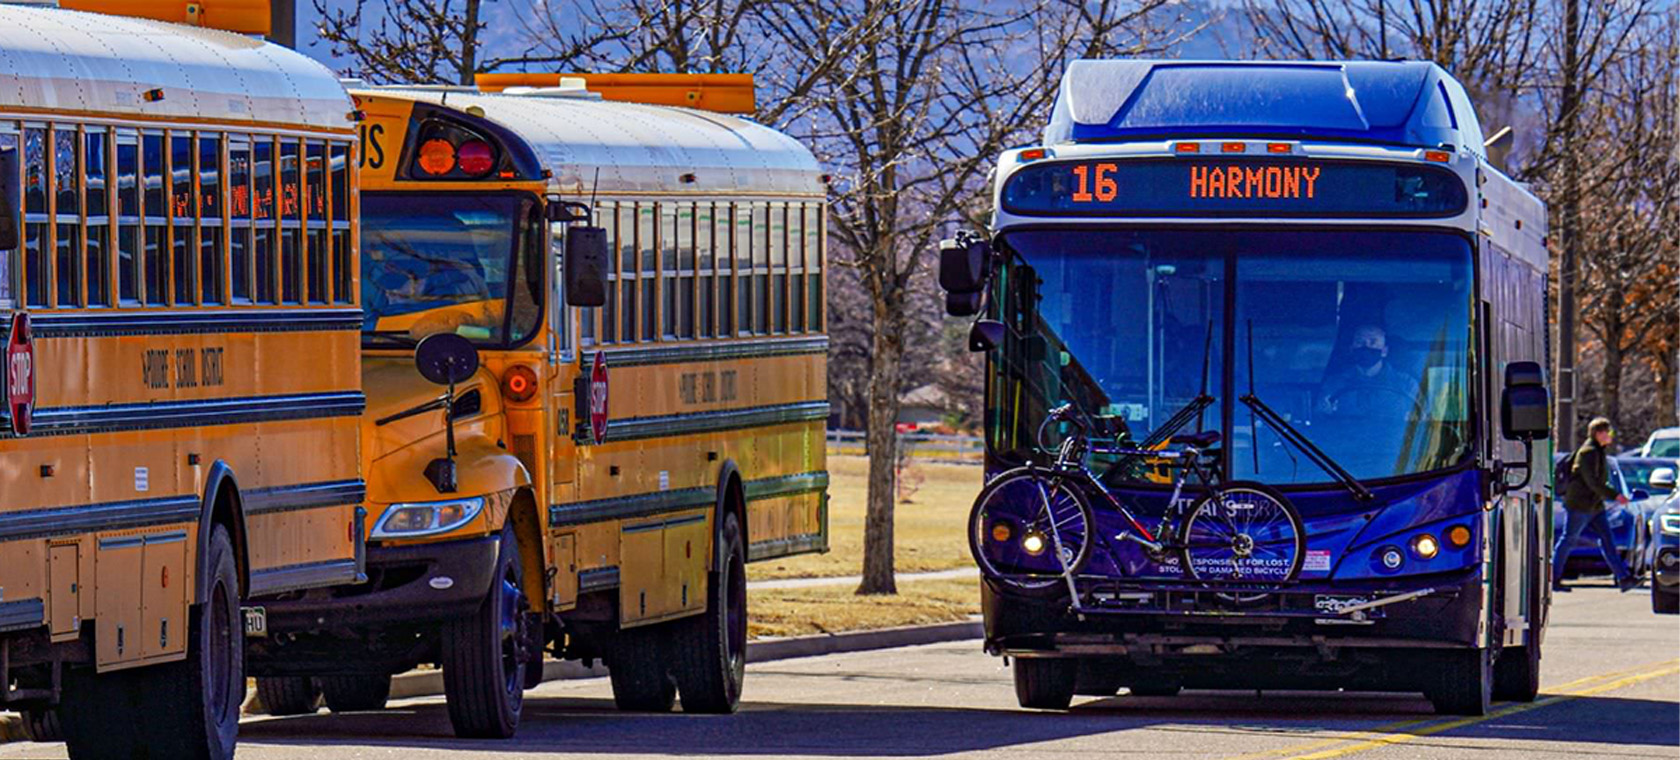 city bus with bicycles on the front of it driving past school buses